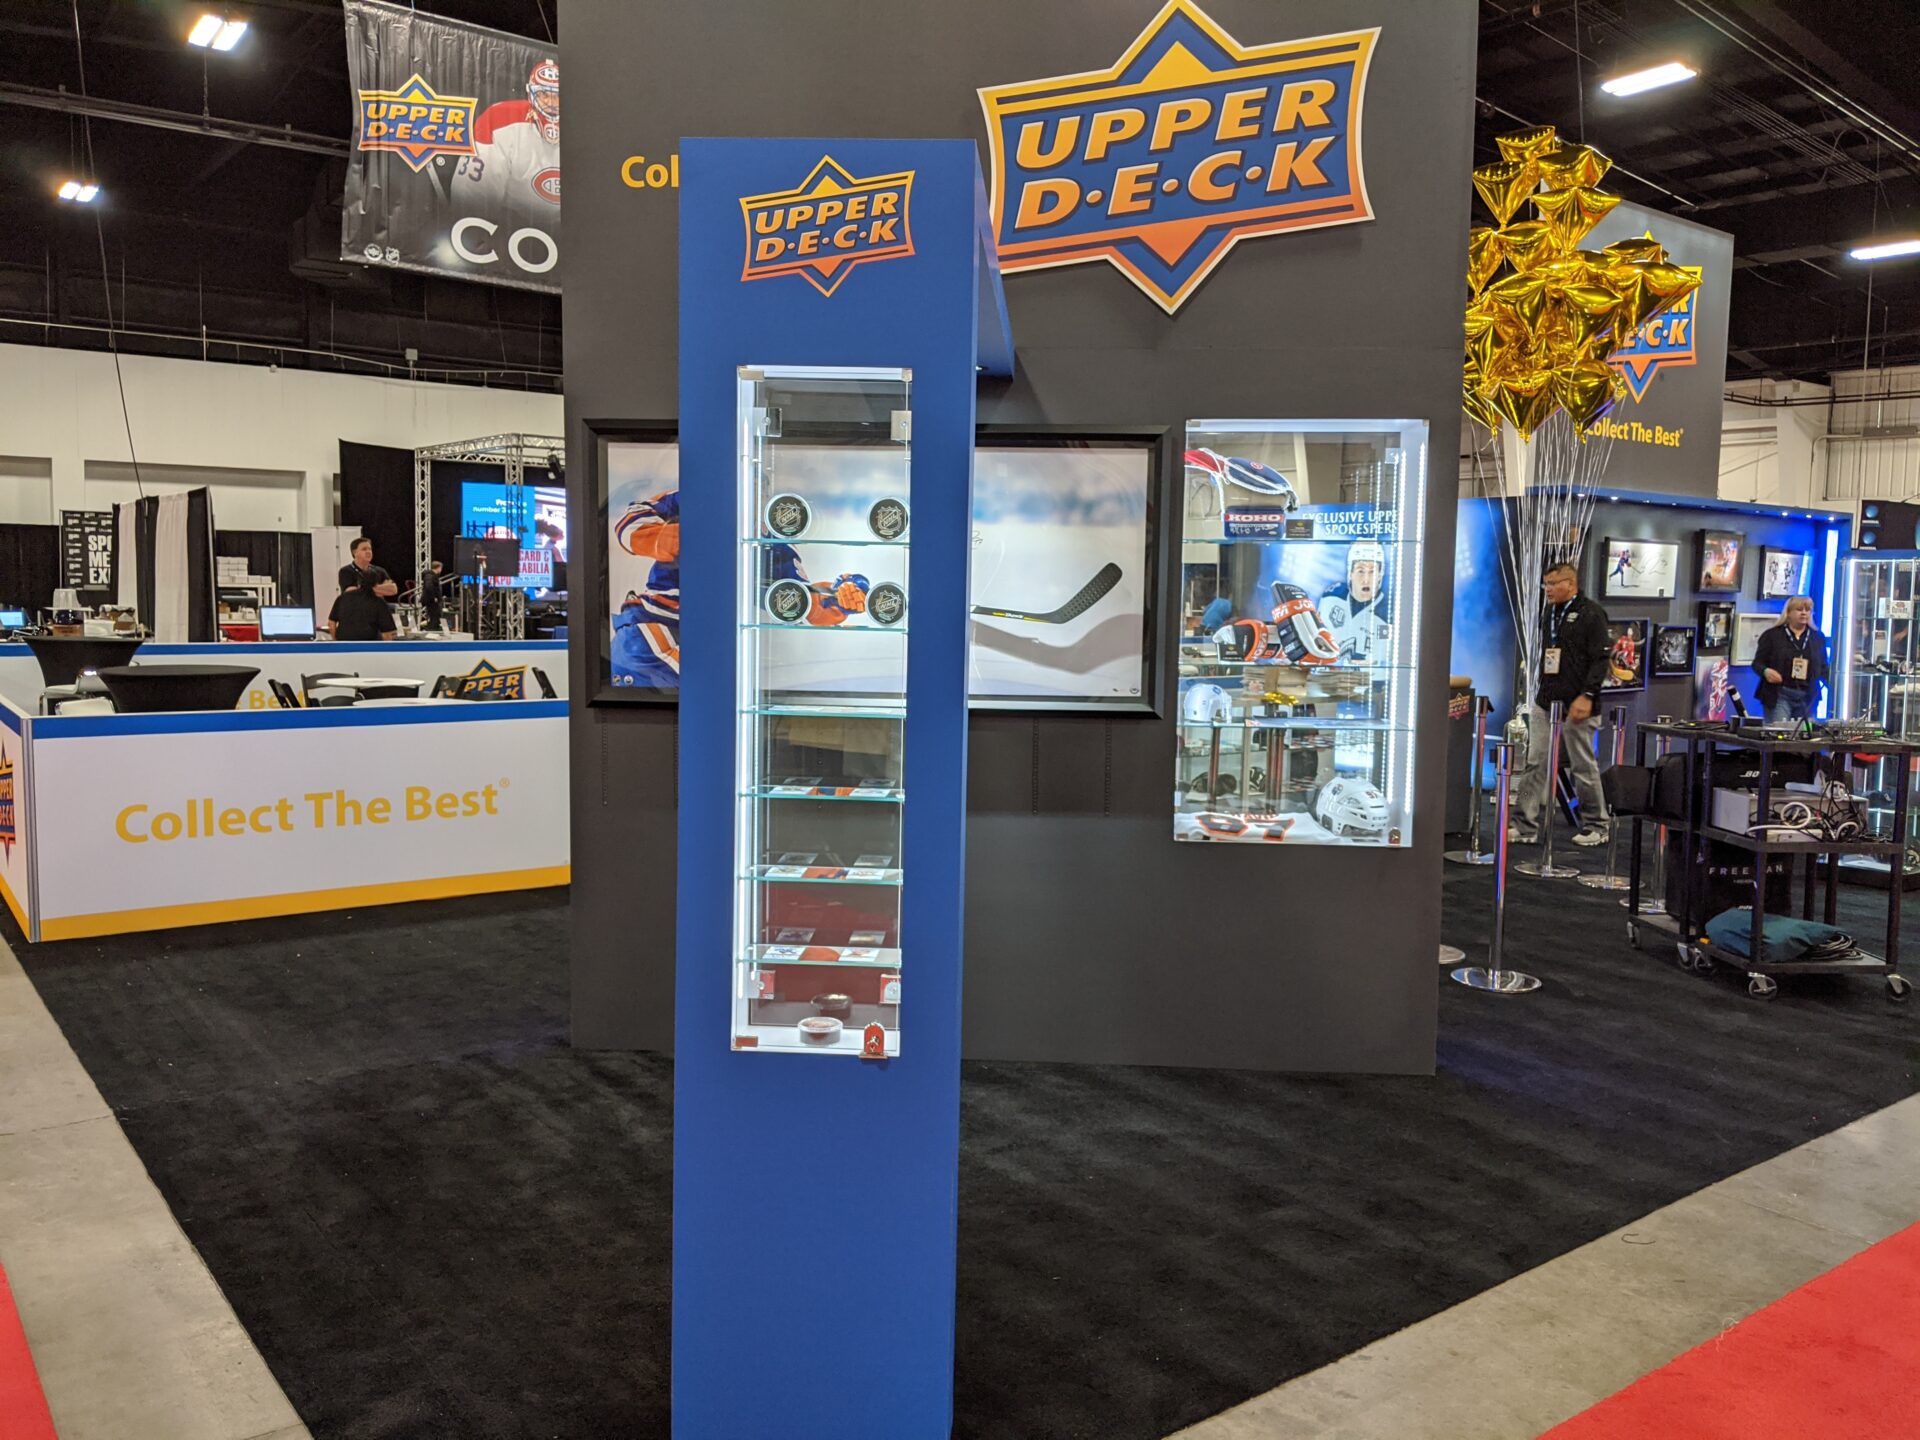 Upper Deck trade show booth with glass exhibits and memorabilia